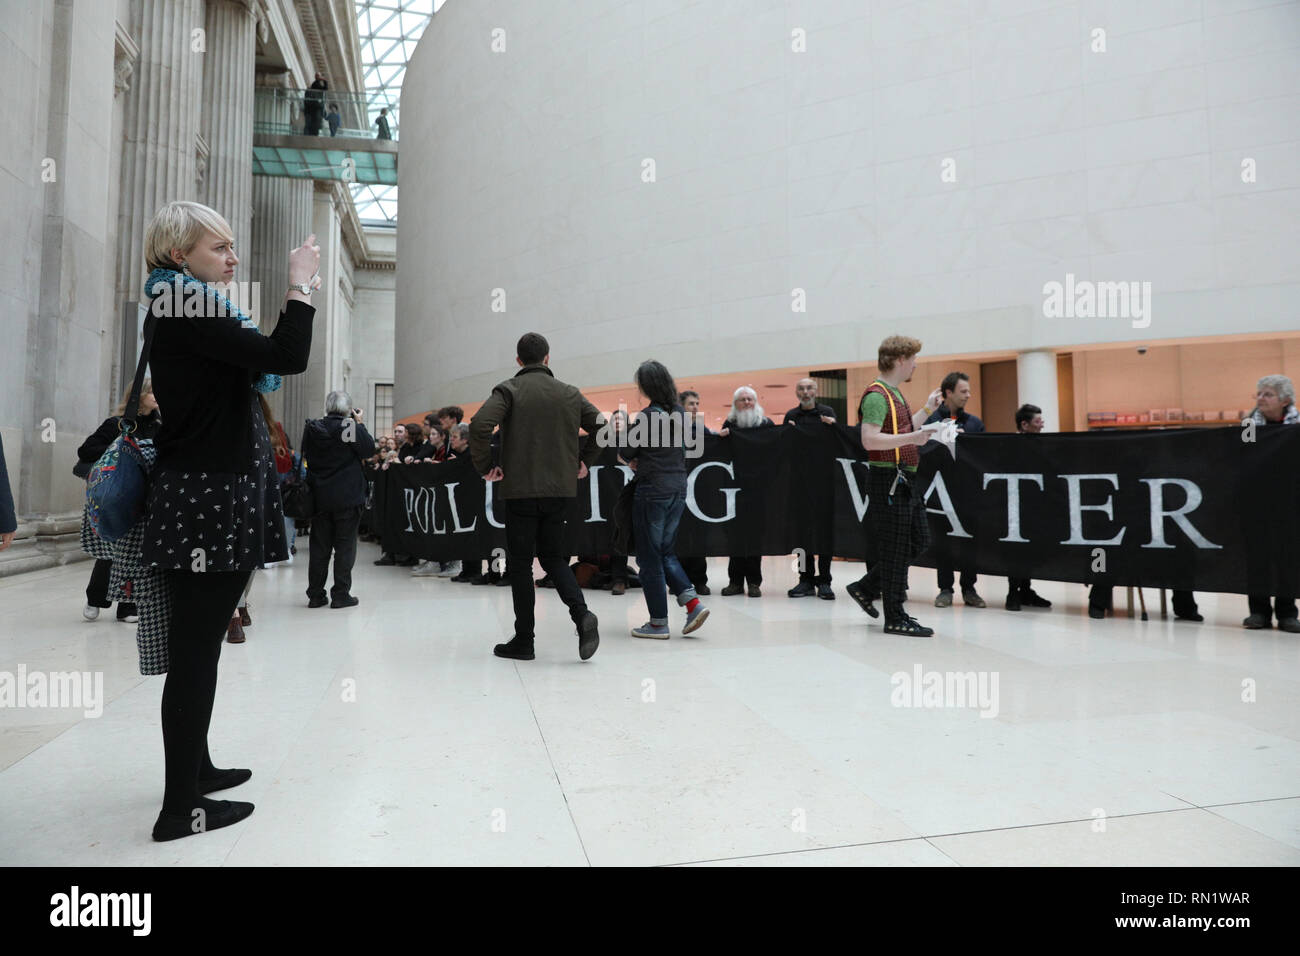 British Museum, London, UK, 16th Feb 2019. 'BP or Not  BP - No War No Warming' protest. Hundreds of protesters from 'BP or Not BP' have formed human chains with messages and later stage a sit in to protest against BP sponsoring the exhibition ' I am Ashurbanipal' at the museum. Protesters rally both within the British Museum Great Hall and outside the exhibition entrance. Stock Photo